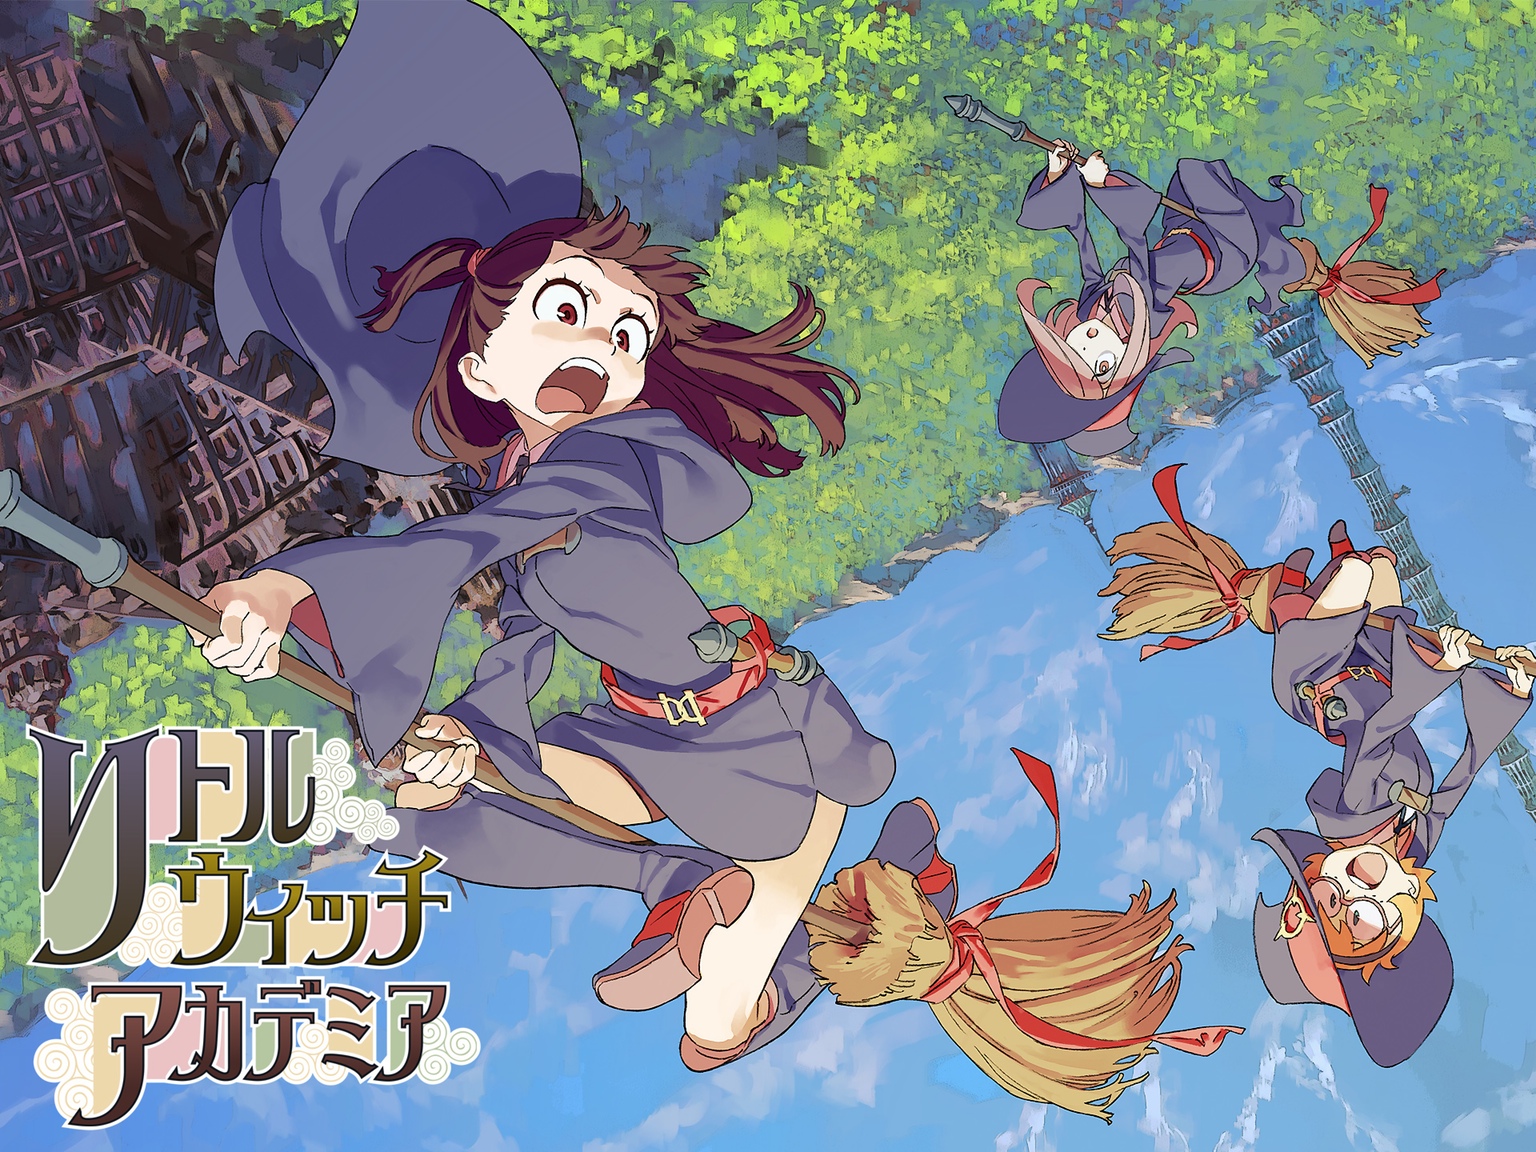 Little Witch Academia #8